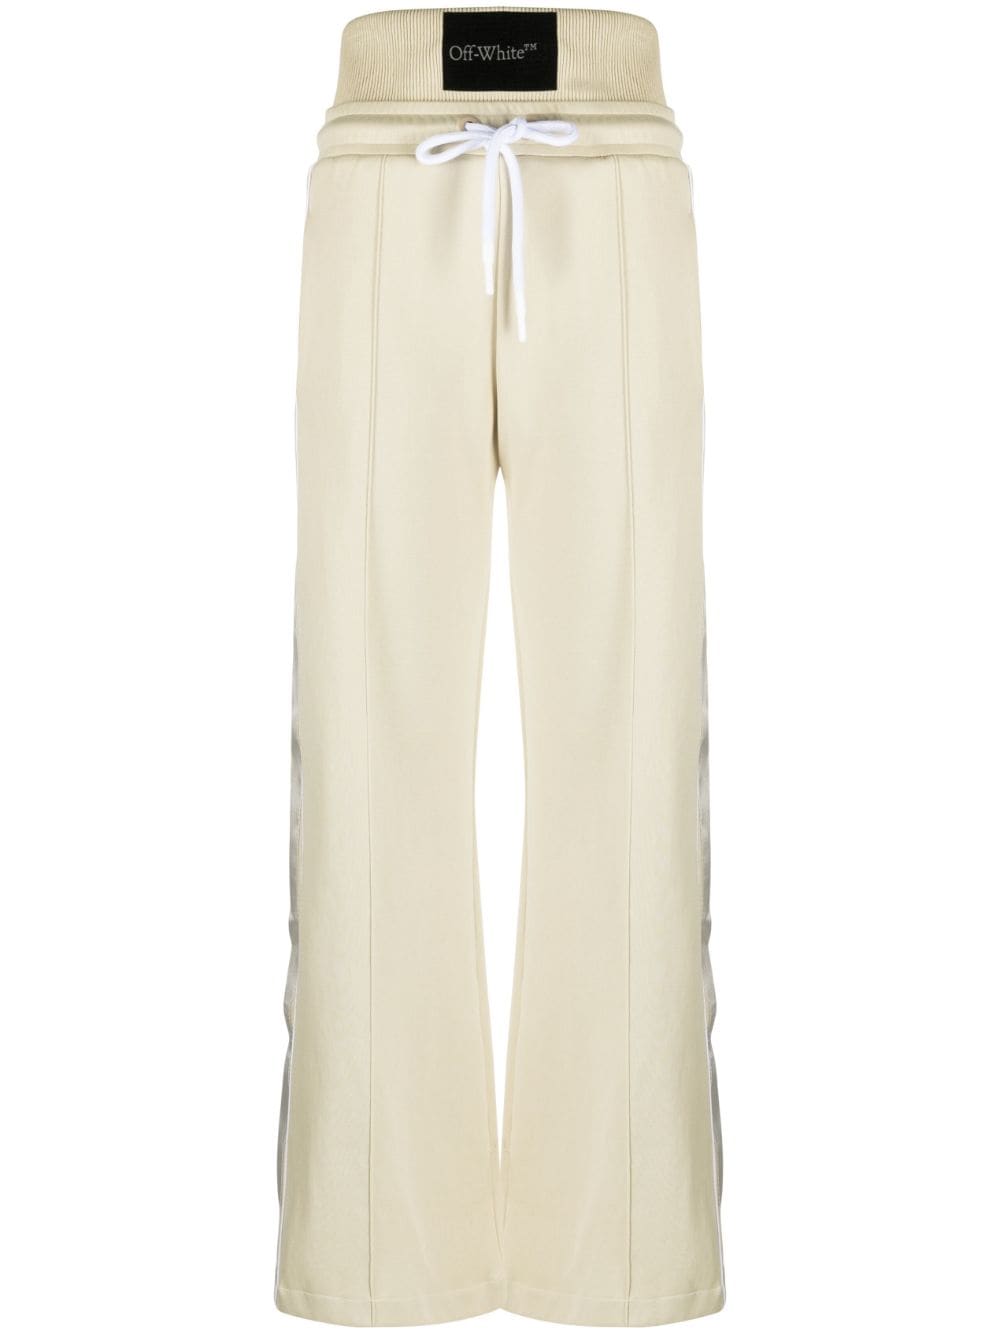 OFF-WHITE HIGH-WAISTED SIDE-STRIPE TRACK PANTS